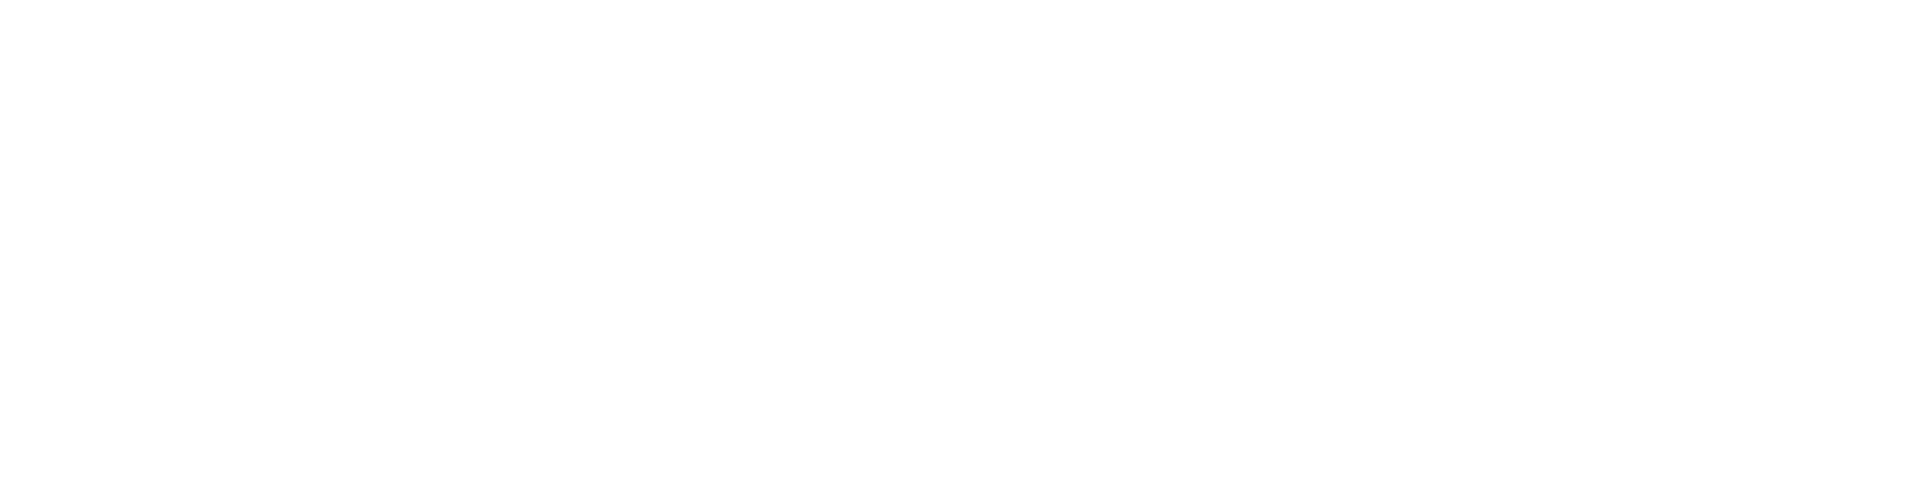 The Scuffed Series 11 - Moonlit Rooftop Showdown